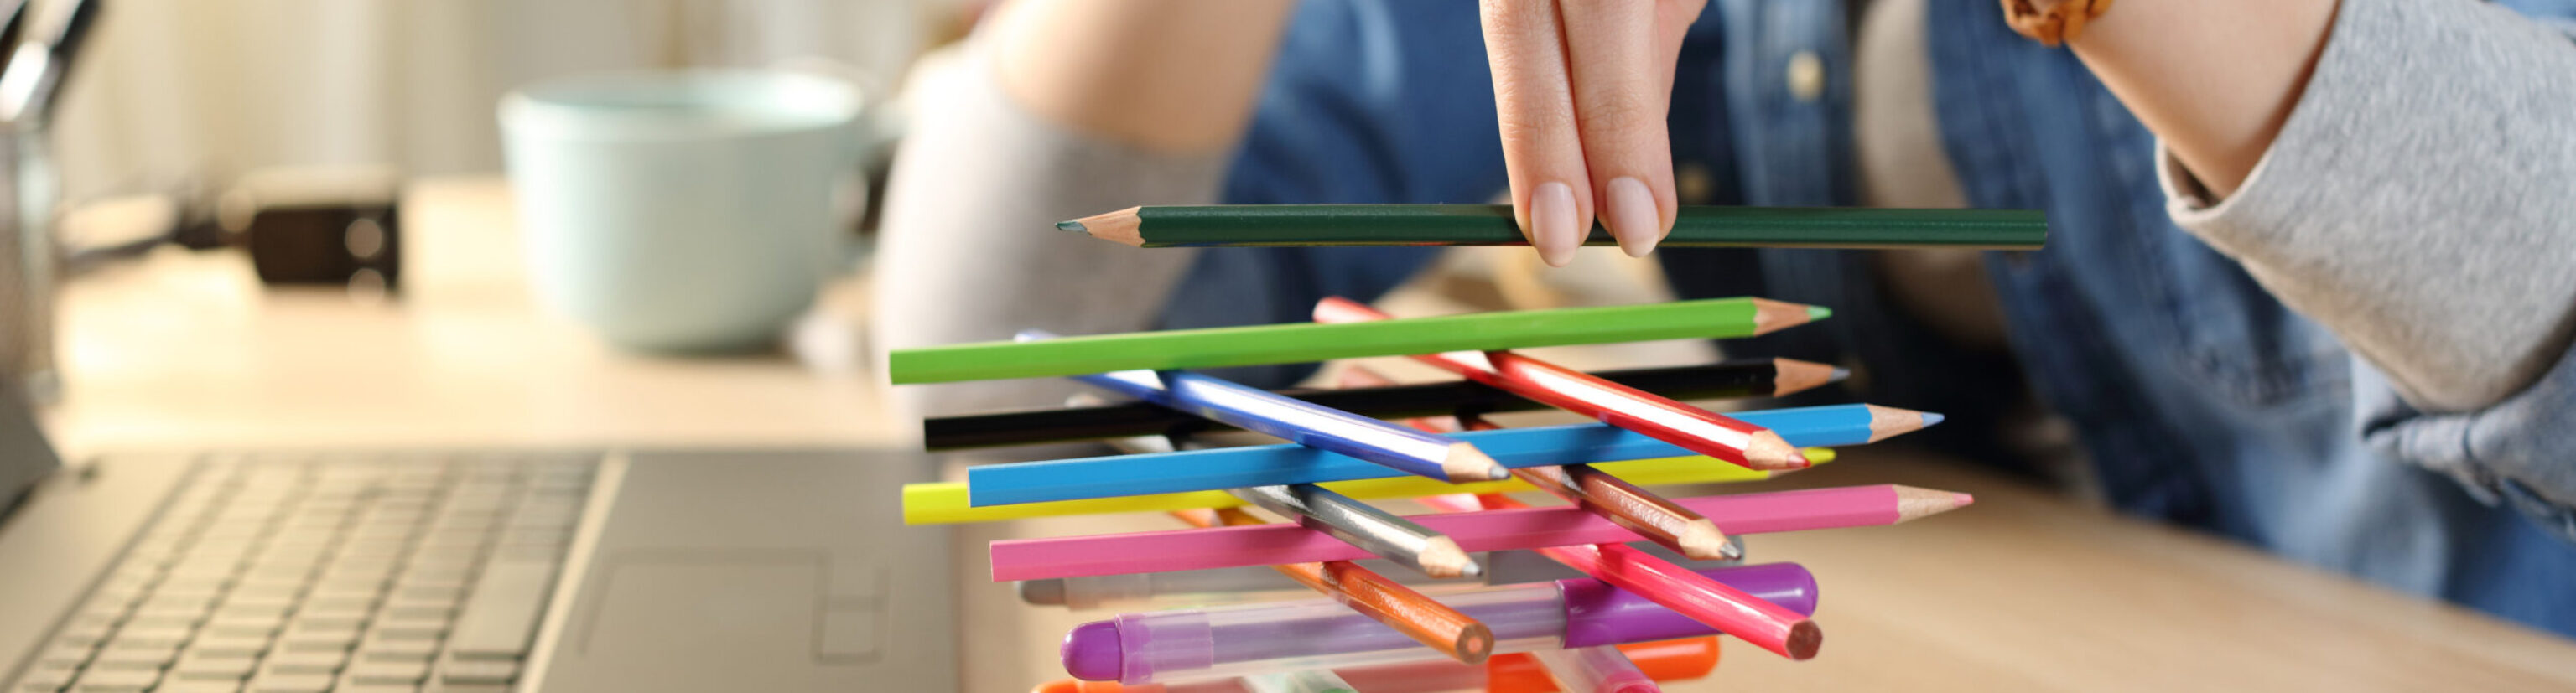 Bored woman at work in need of productivity tips builds a colorful stack of pens and pencils